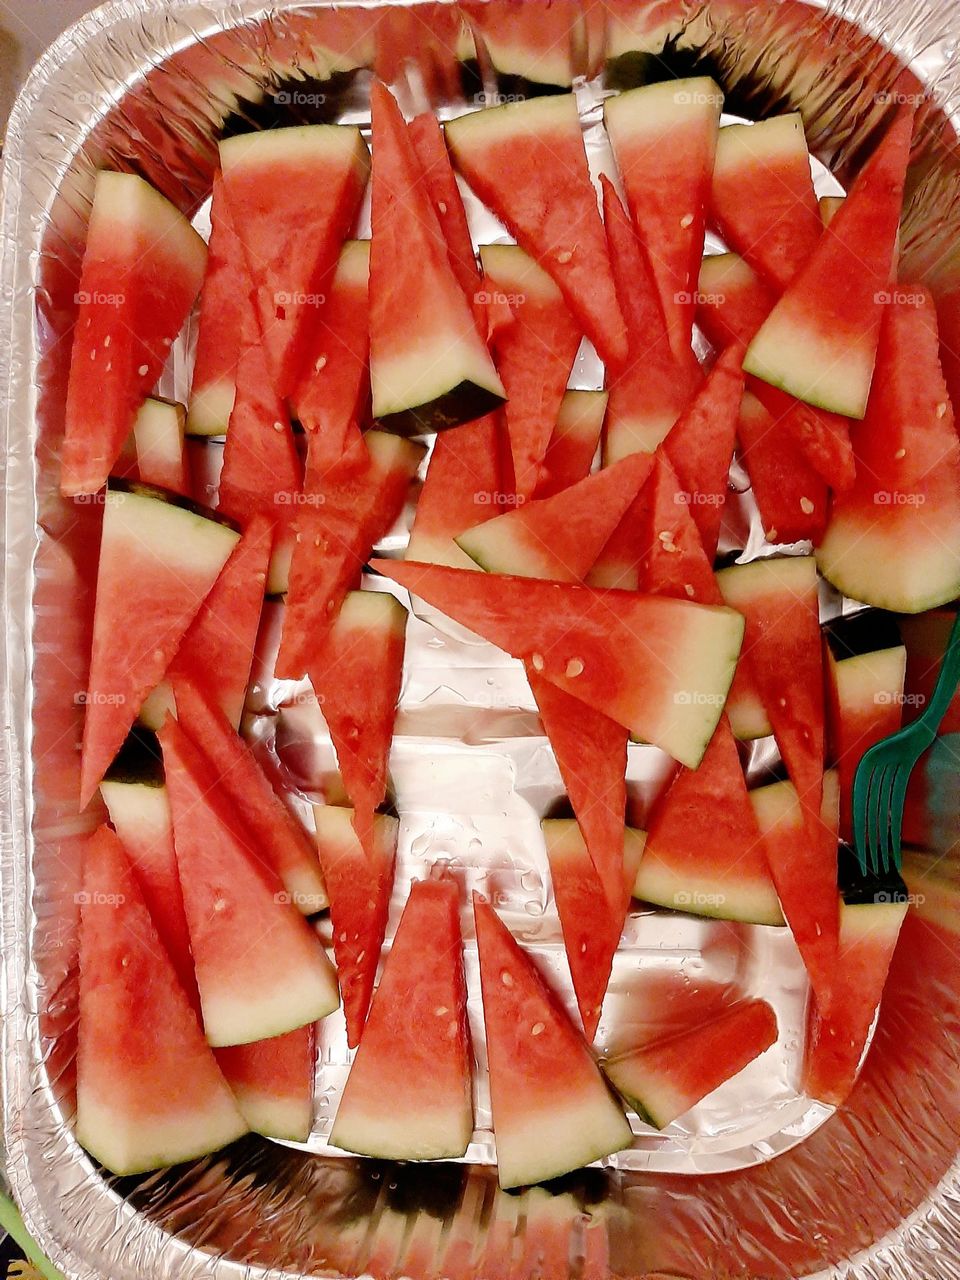 Watermelon shaped in triangles.